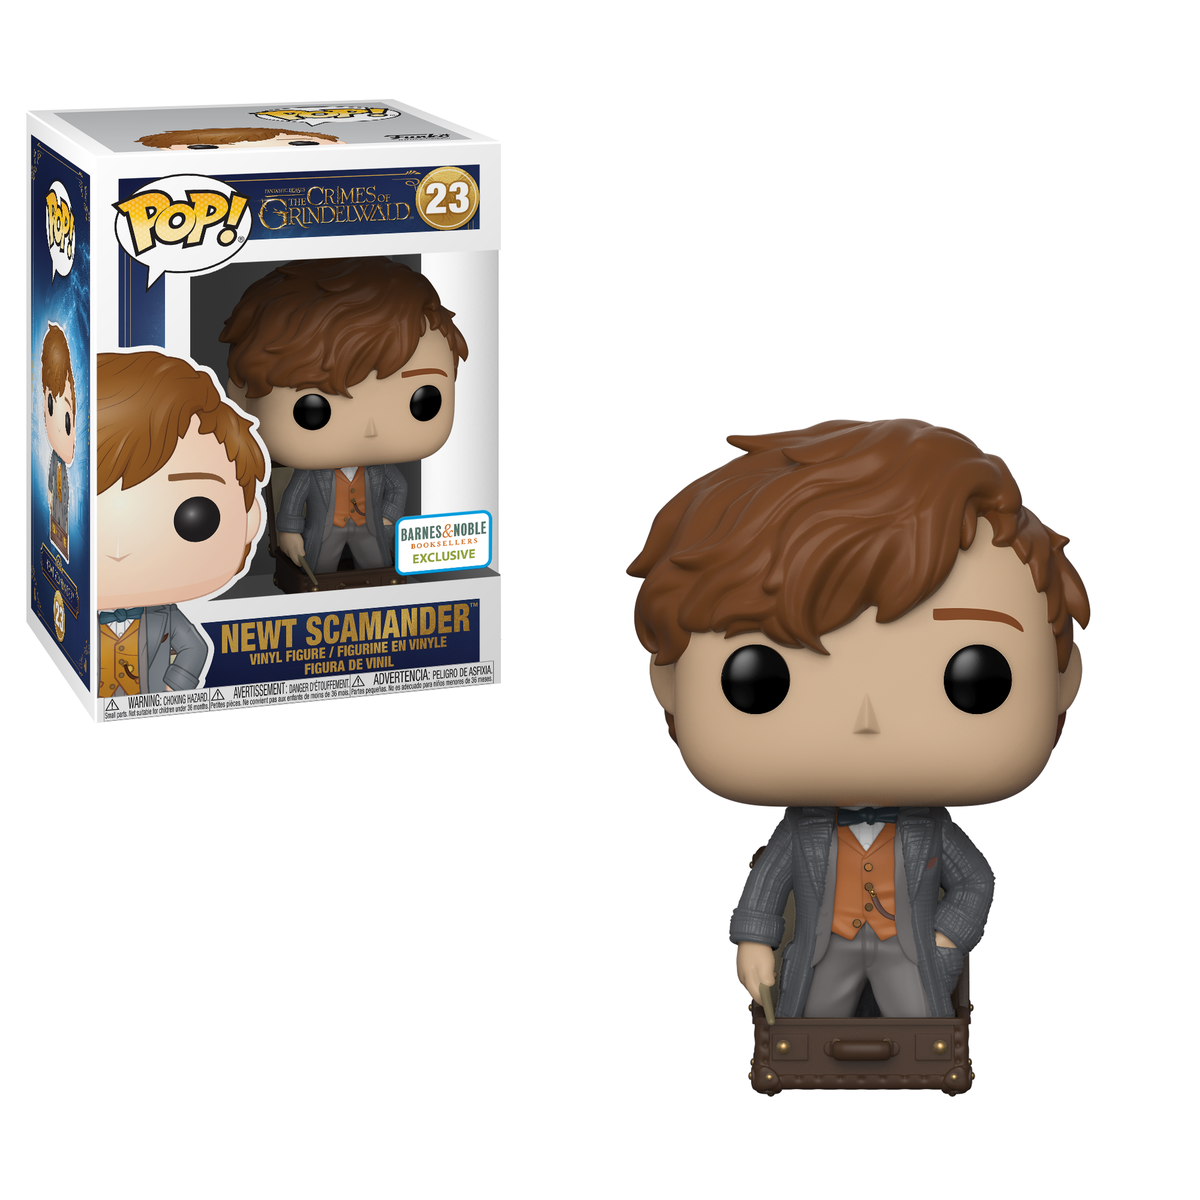 Funko Twitter: "RT &amp; follow for the win a @BNBuzz exclusive Newt Scamander Pop! #FantasticBeasts https://t.co/ZOyySEWTLM" / Twitter